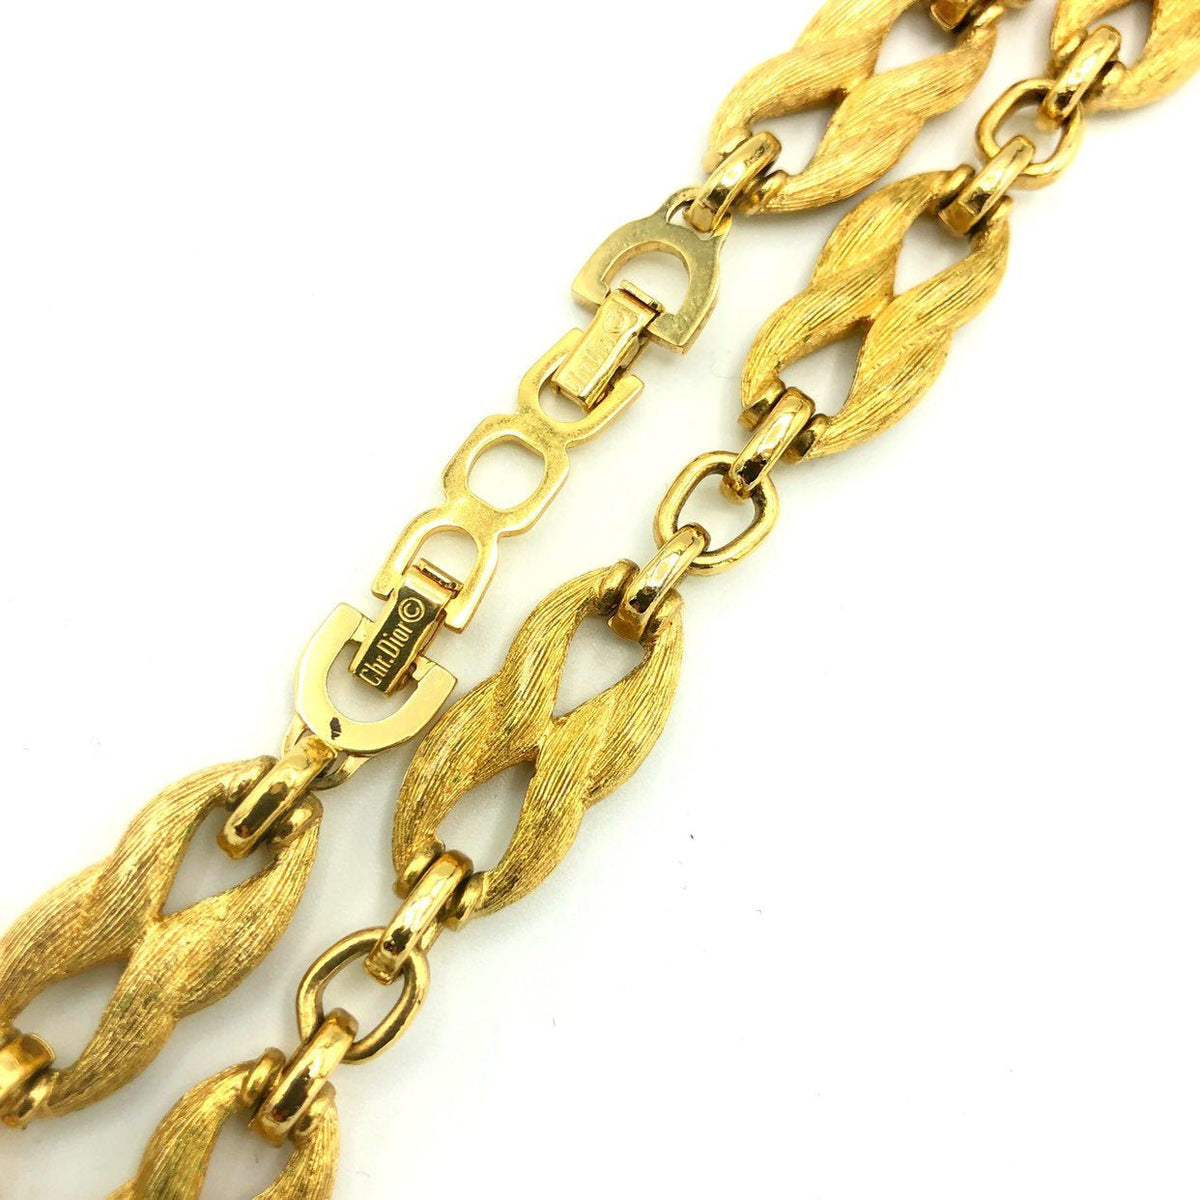 Christian Dior Classic Gold Textured Link Chain Vintage Necklace - 24 Wishes Vintage Jewelry